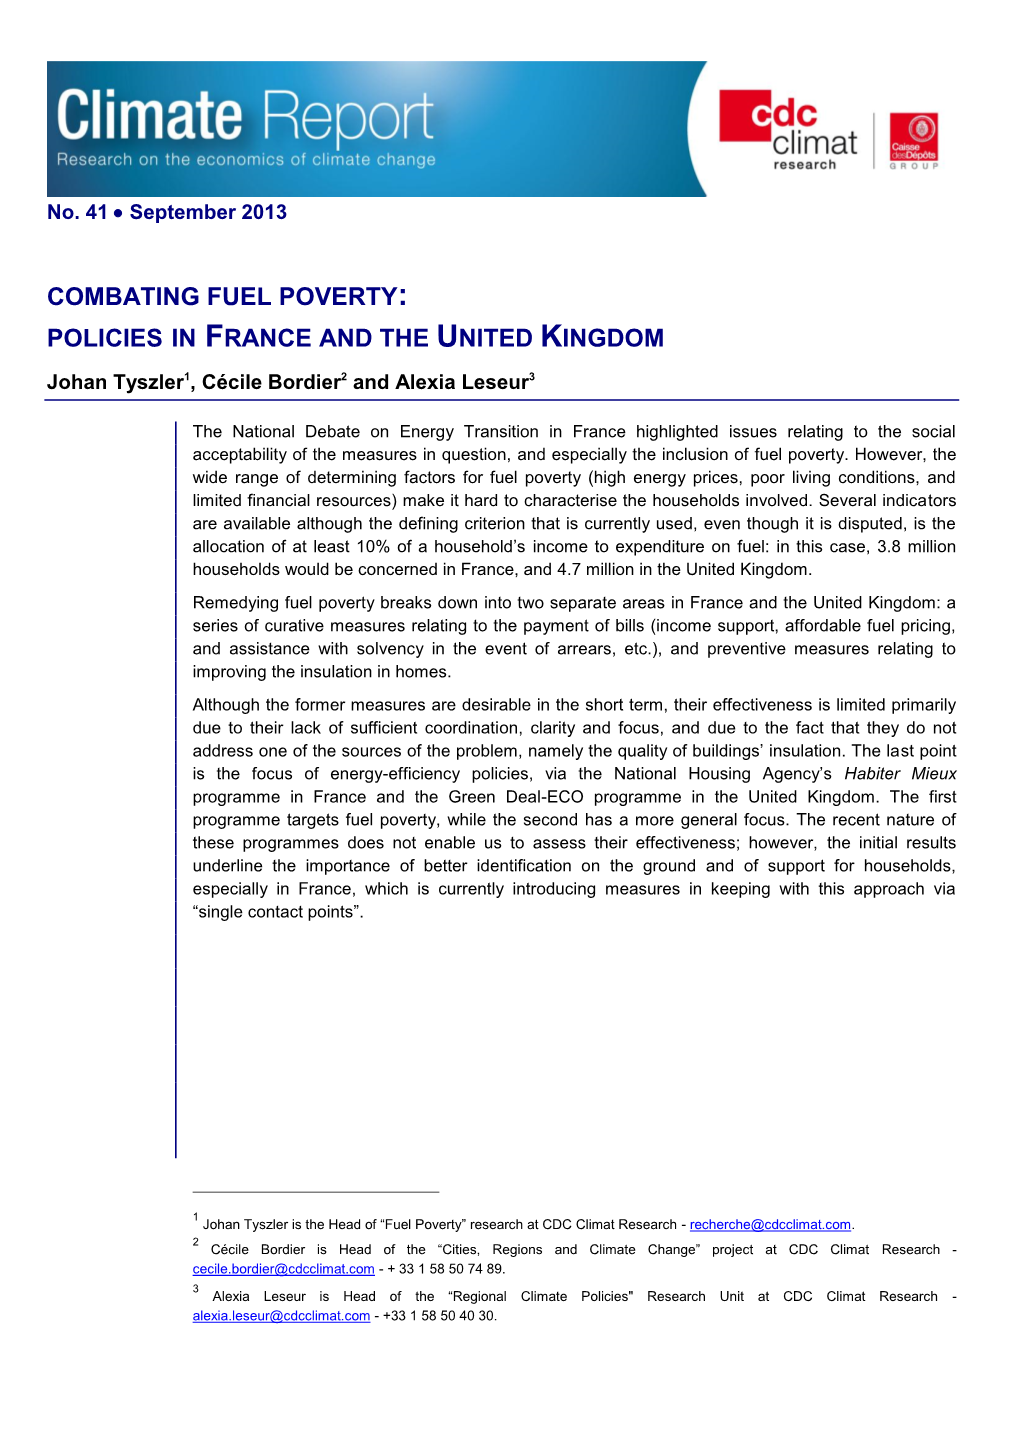 COMBATING FUEL POVERTY: POLICIES in FRANCE and the UNITED KINGDOM Johan Tyszler1, Cécile Bordier2 and Alexia Leseur3